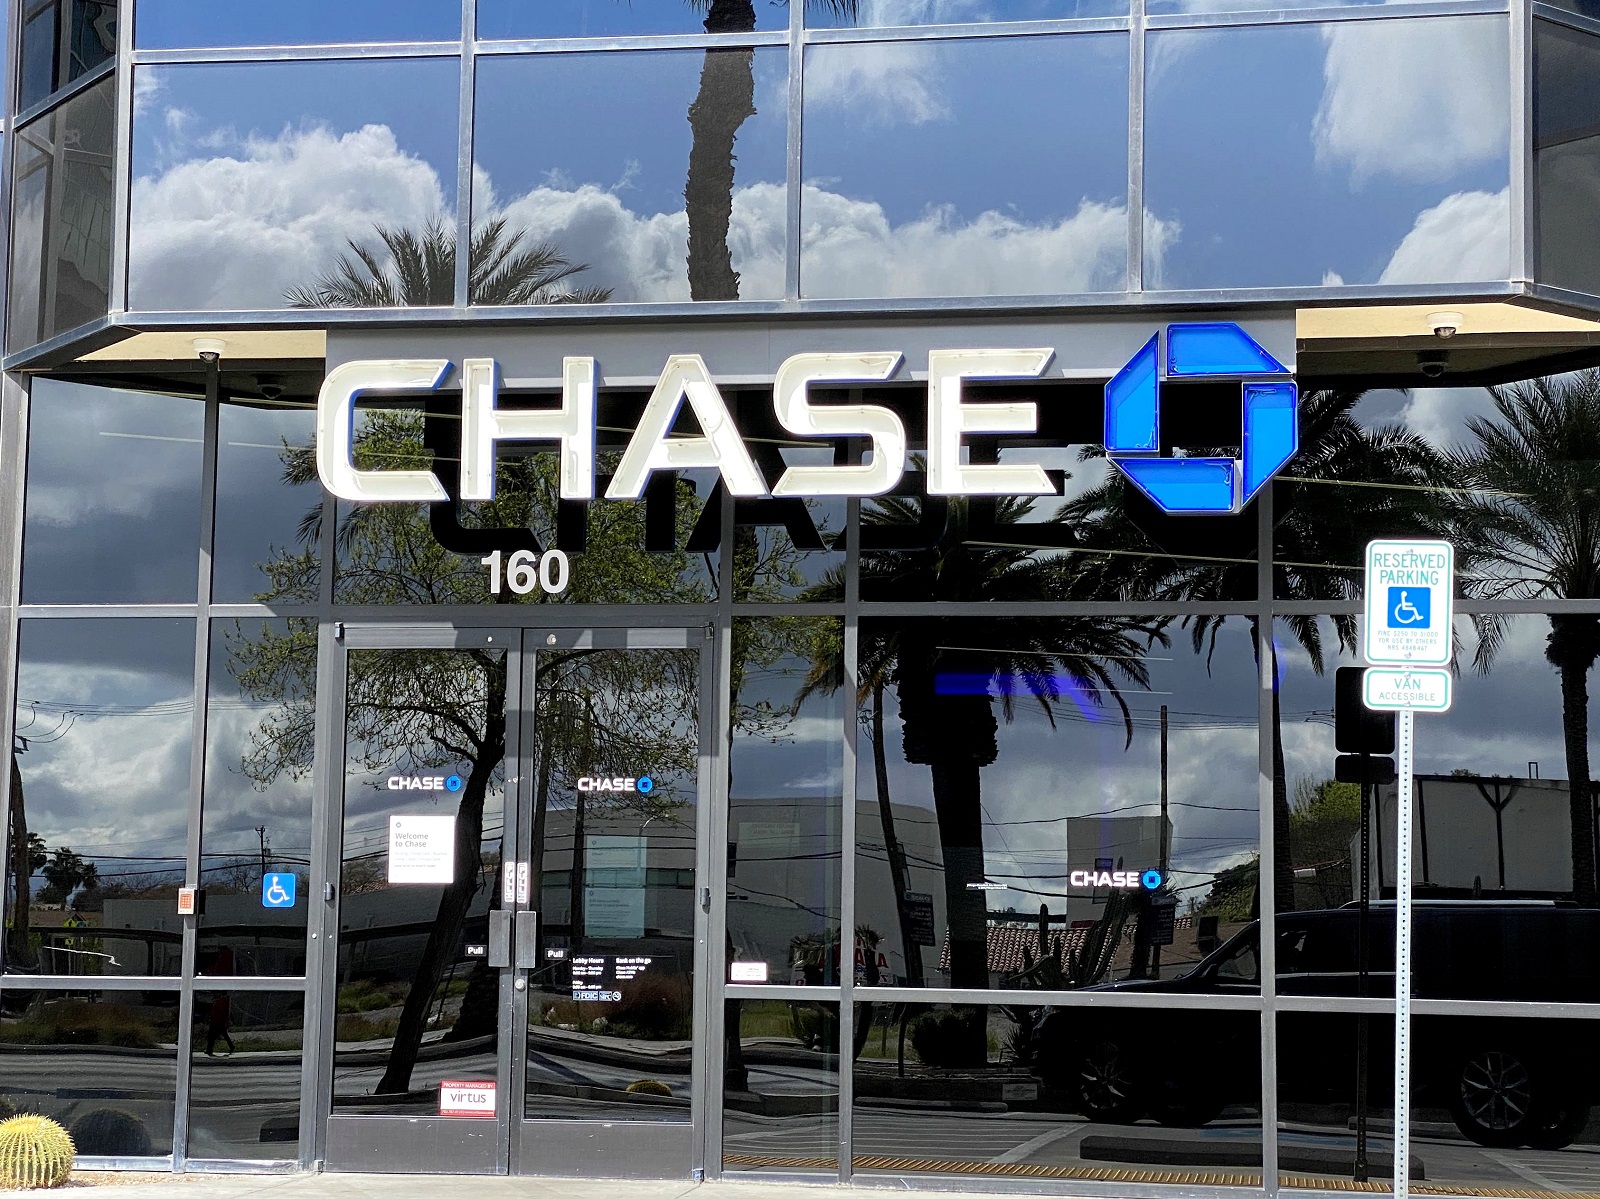 (End Date Announced) Chase Sapphire Preferred, Bonus of 80,000 Points Now Public..